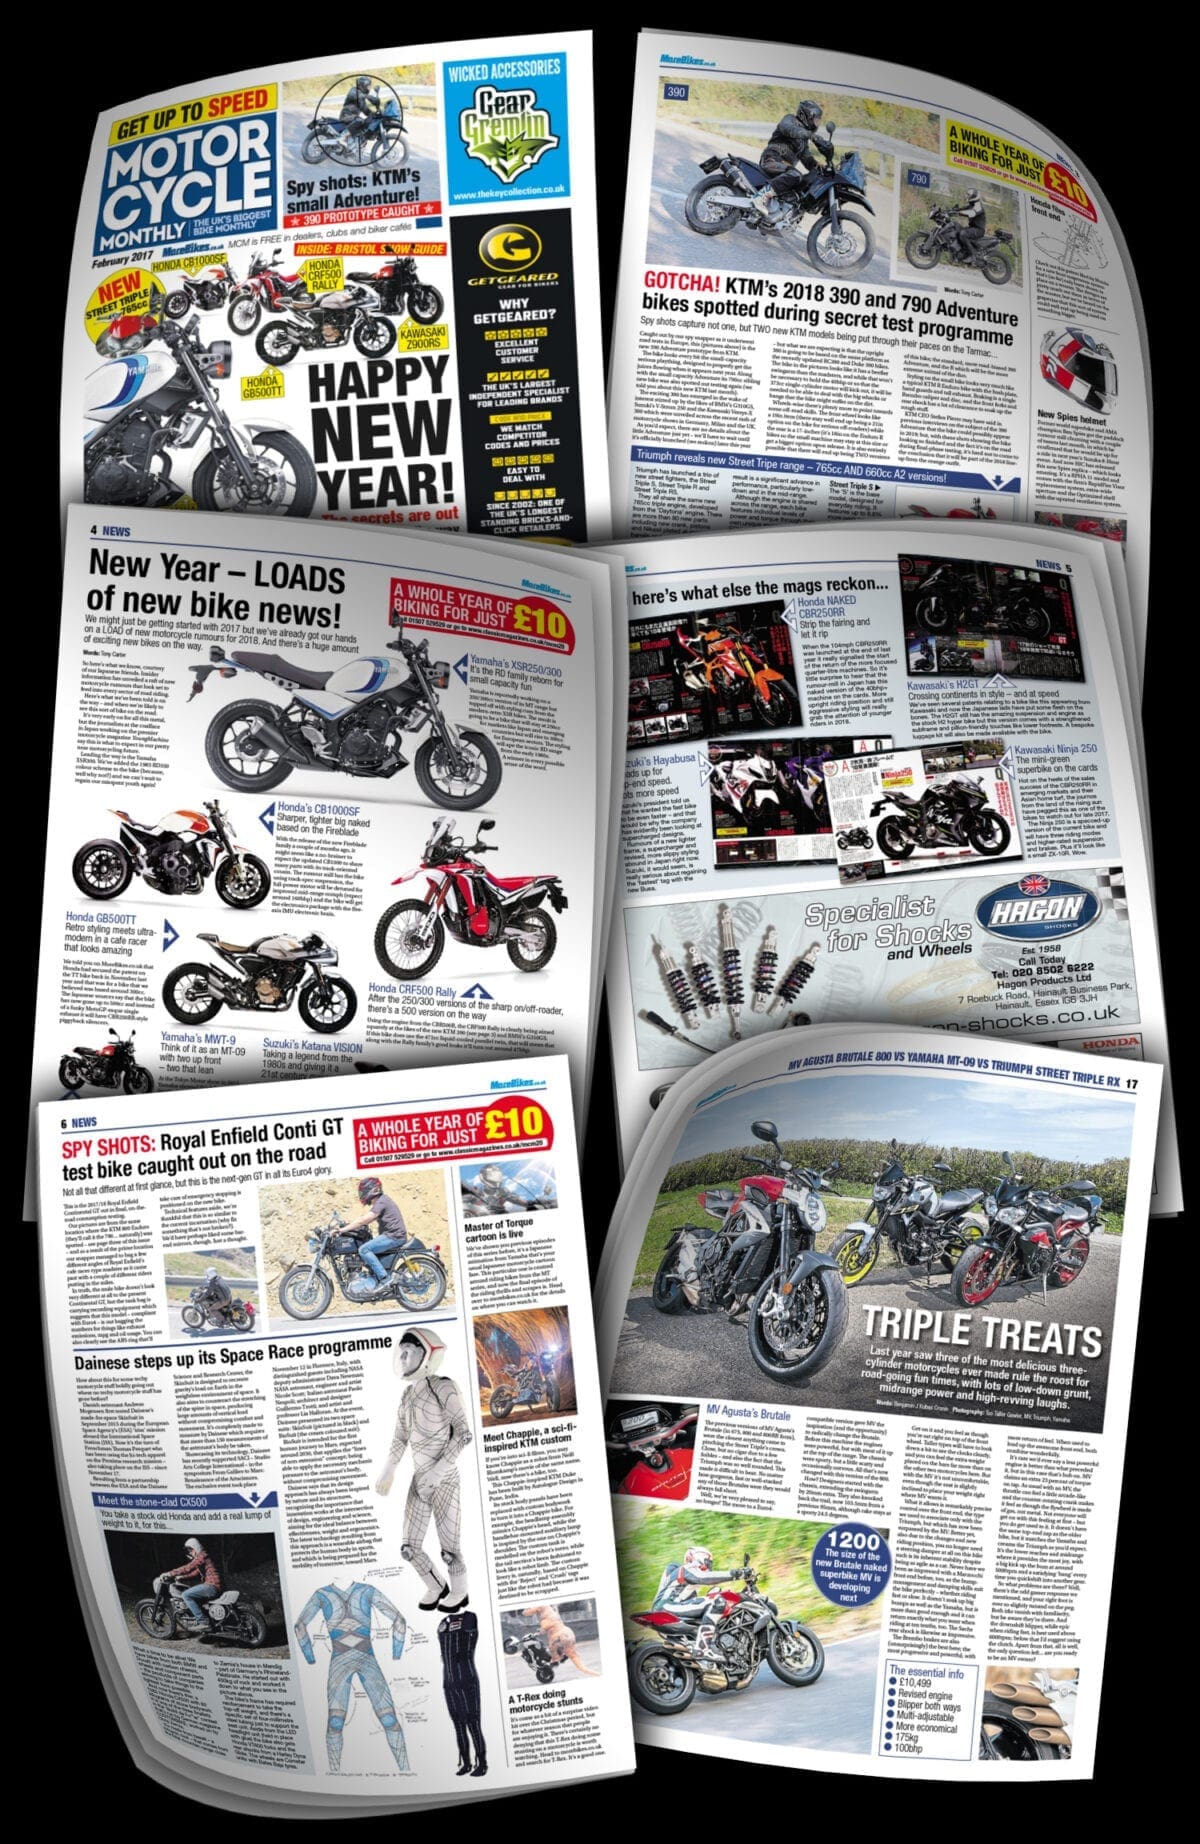 Motor Cycle Monthly – new issue out NOW. Loads of new bike news in there (including the rebirth of the RD350 family line with the XSR300). And 15 other new bikes! Grab the motorcycle newspaper for FREE!